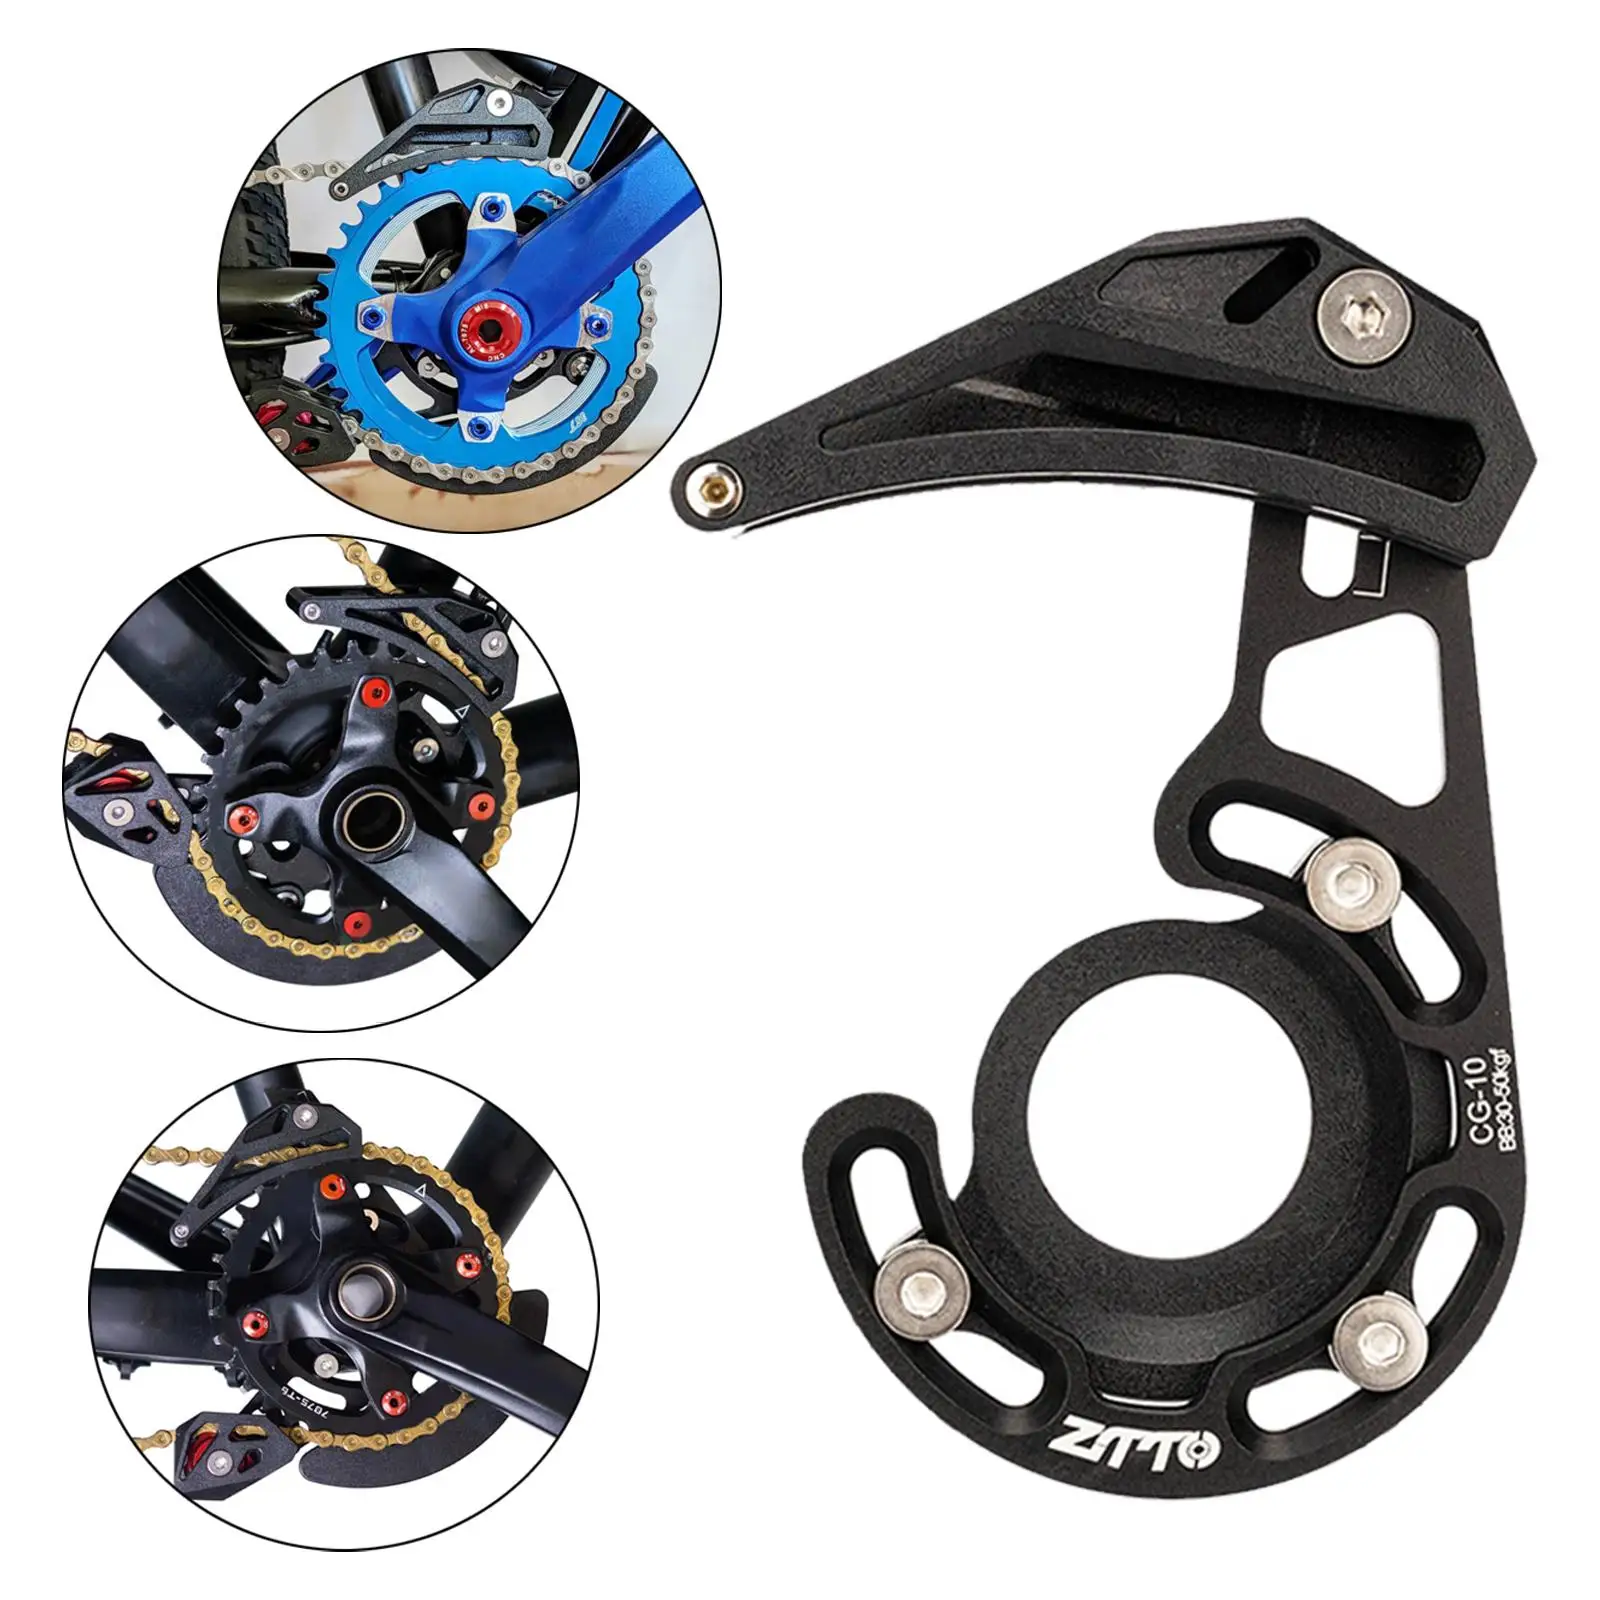 Chain , Chainring  Bike Chain Stabilizer Chainring Guard for Bicycles Components